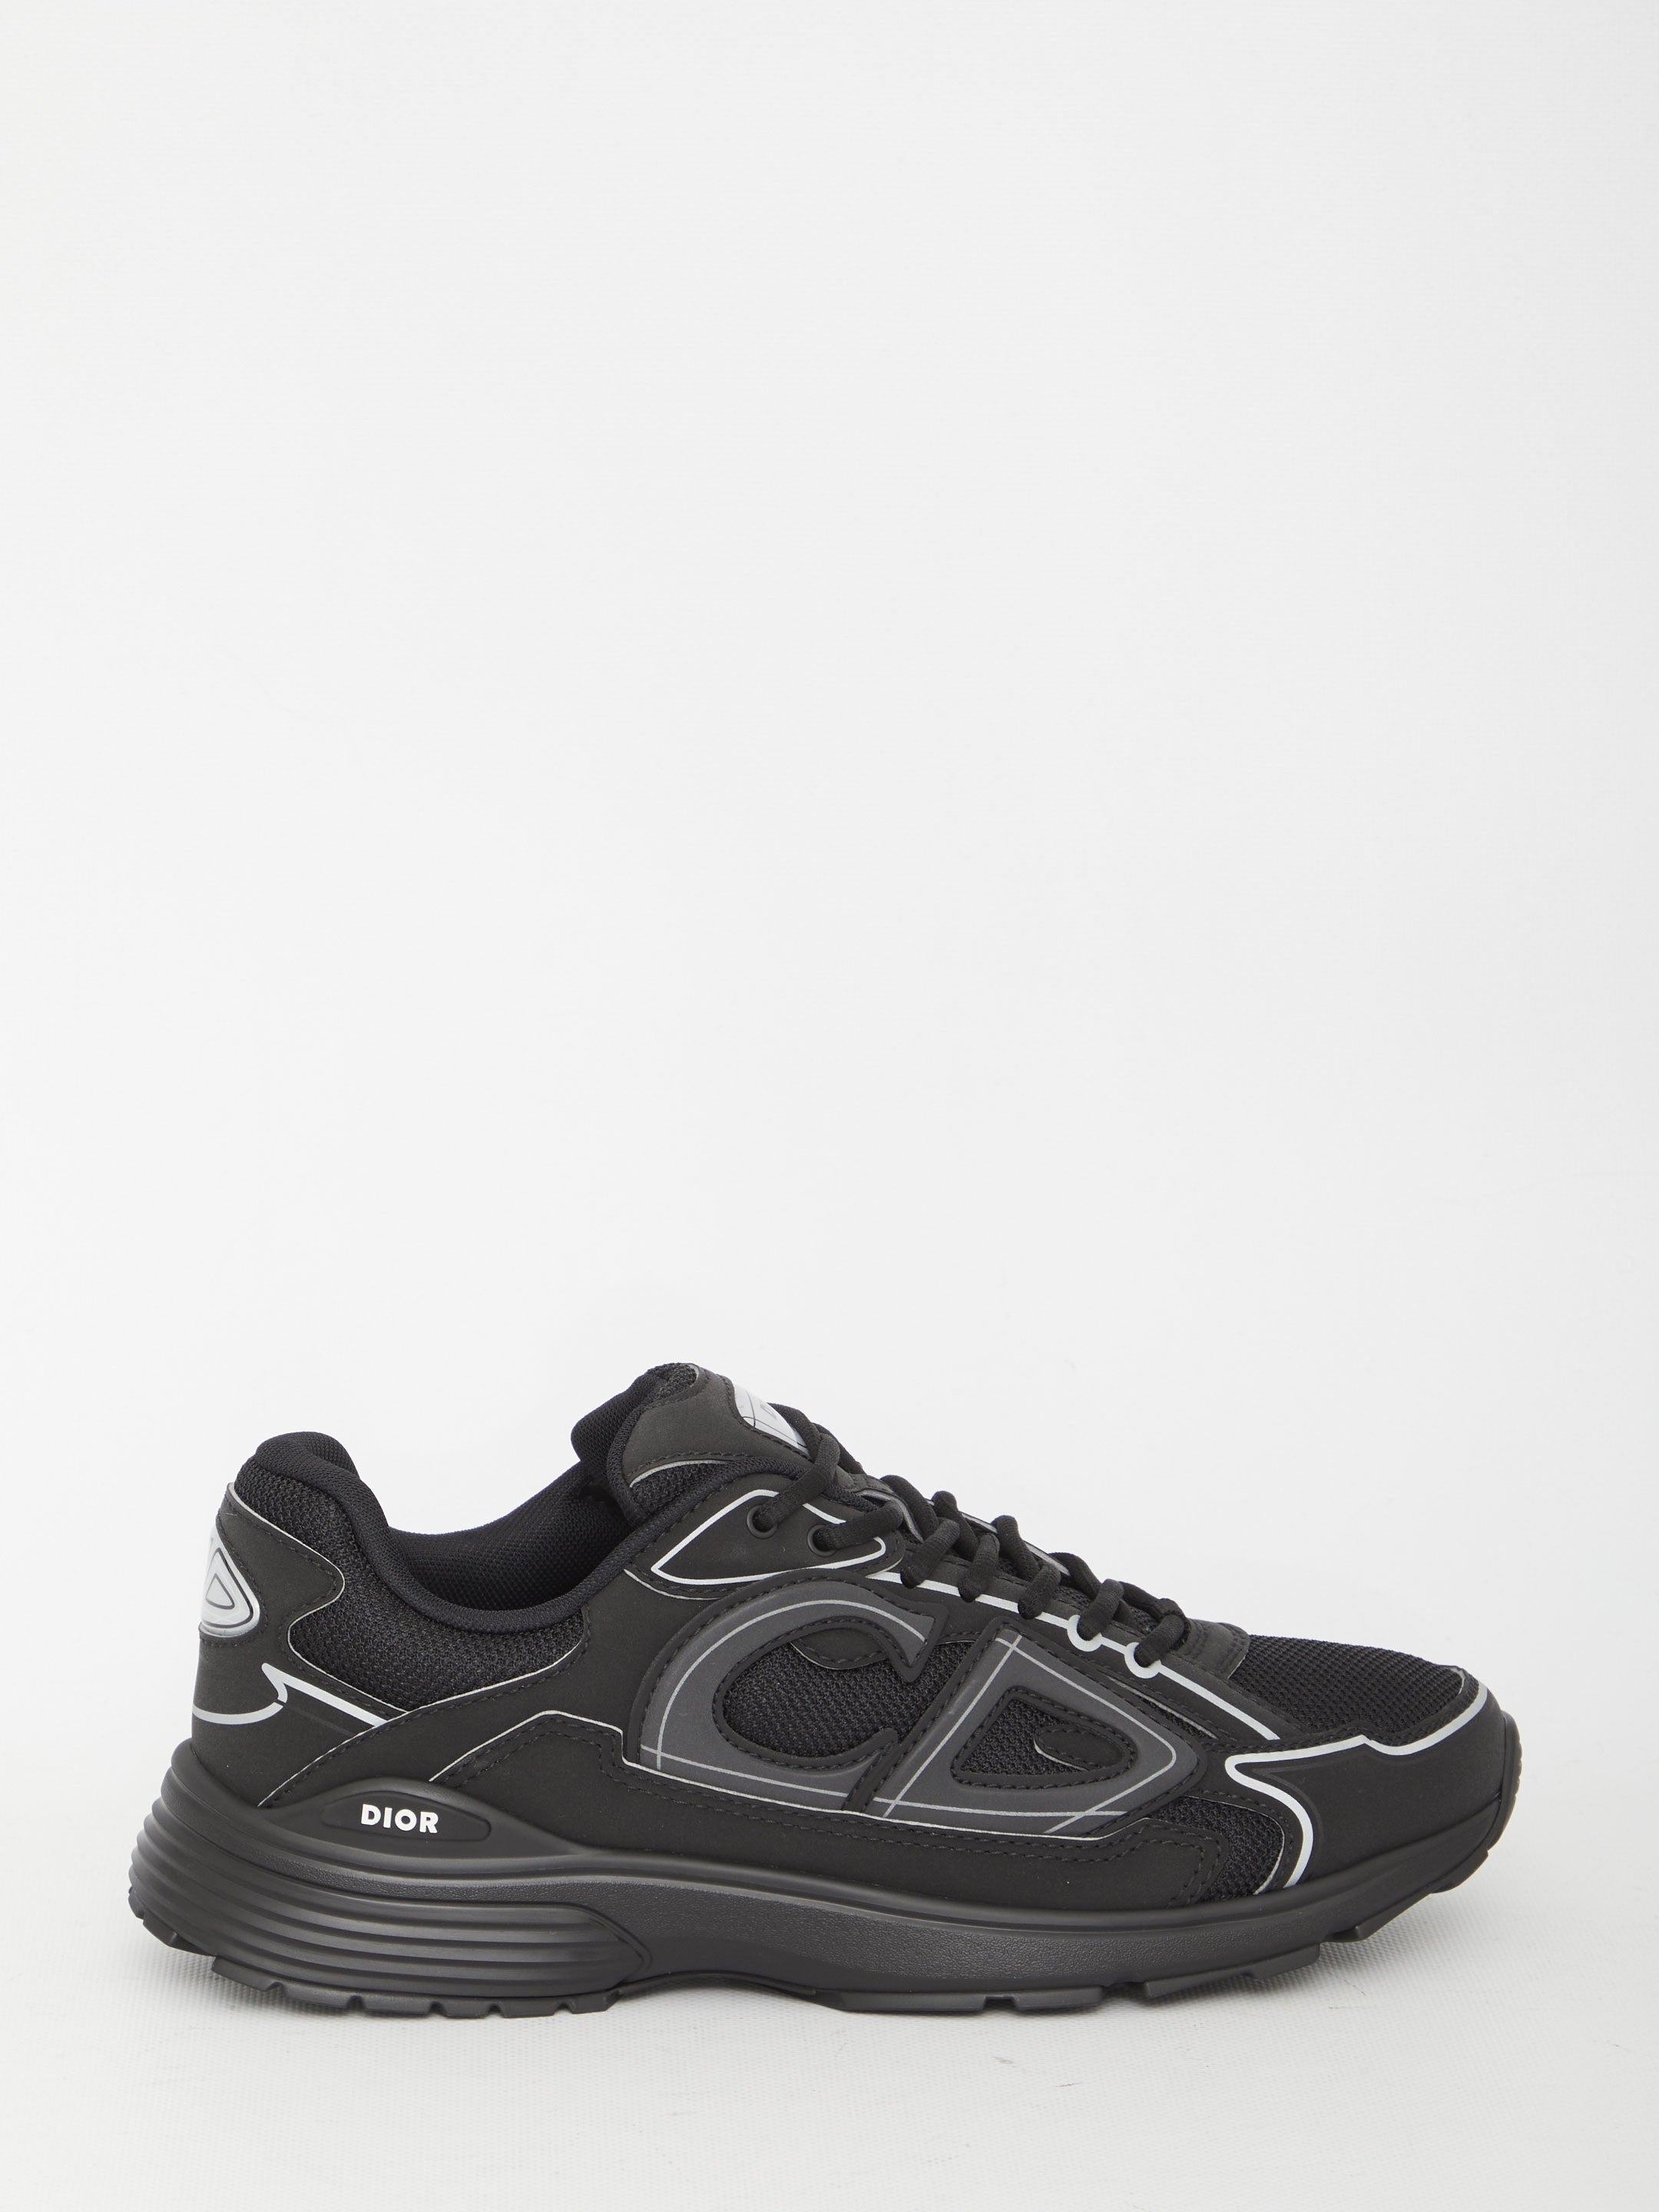 DIOR-HOMME-OUTLET-SALE-B30-sneakers-Sneakers-40-BLACK-ARCHIVE-COLLECTION.jpg